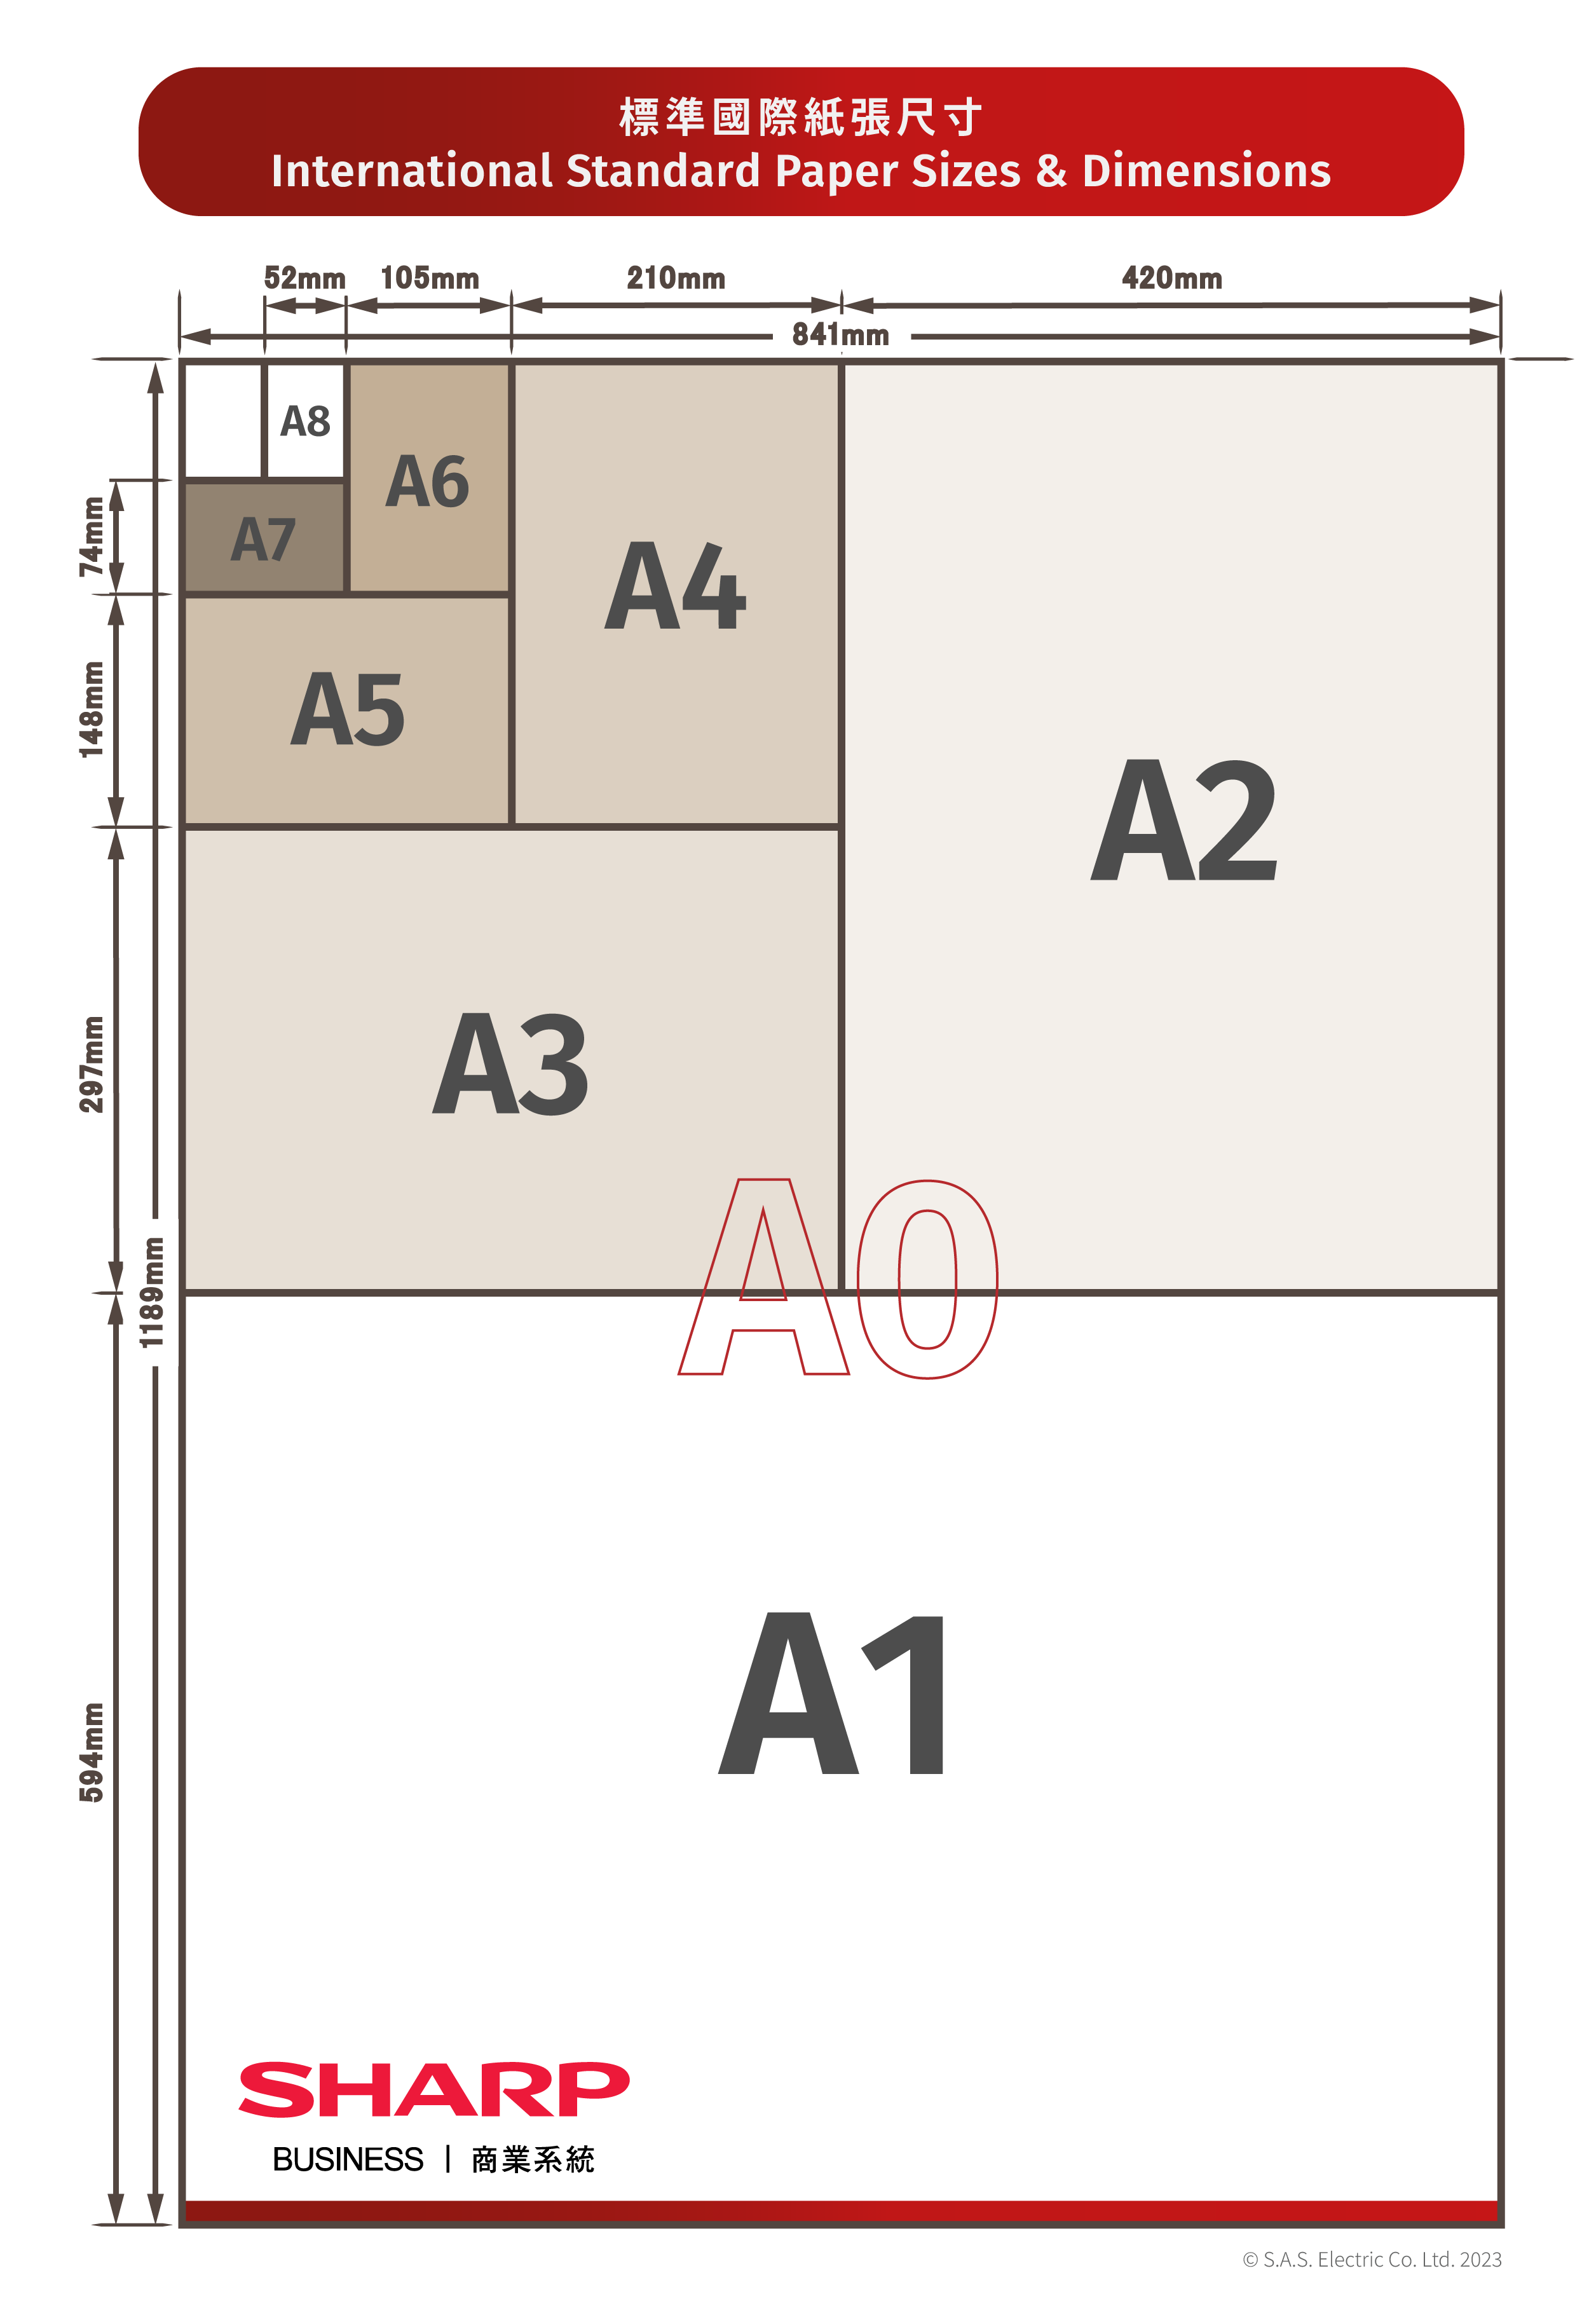 A3 paper size and dimensions: everything you need to know